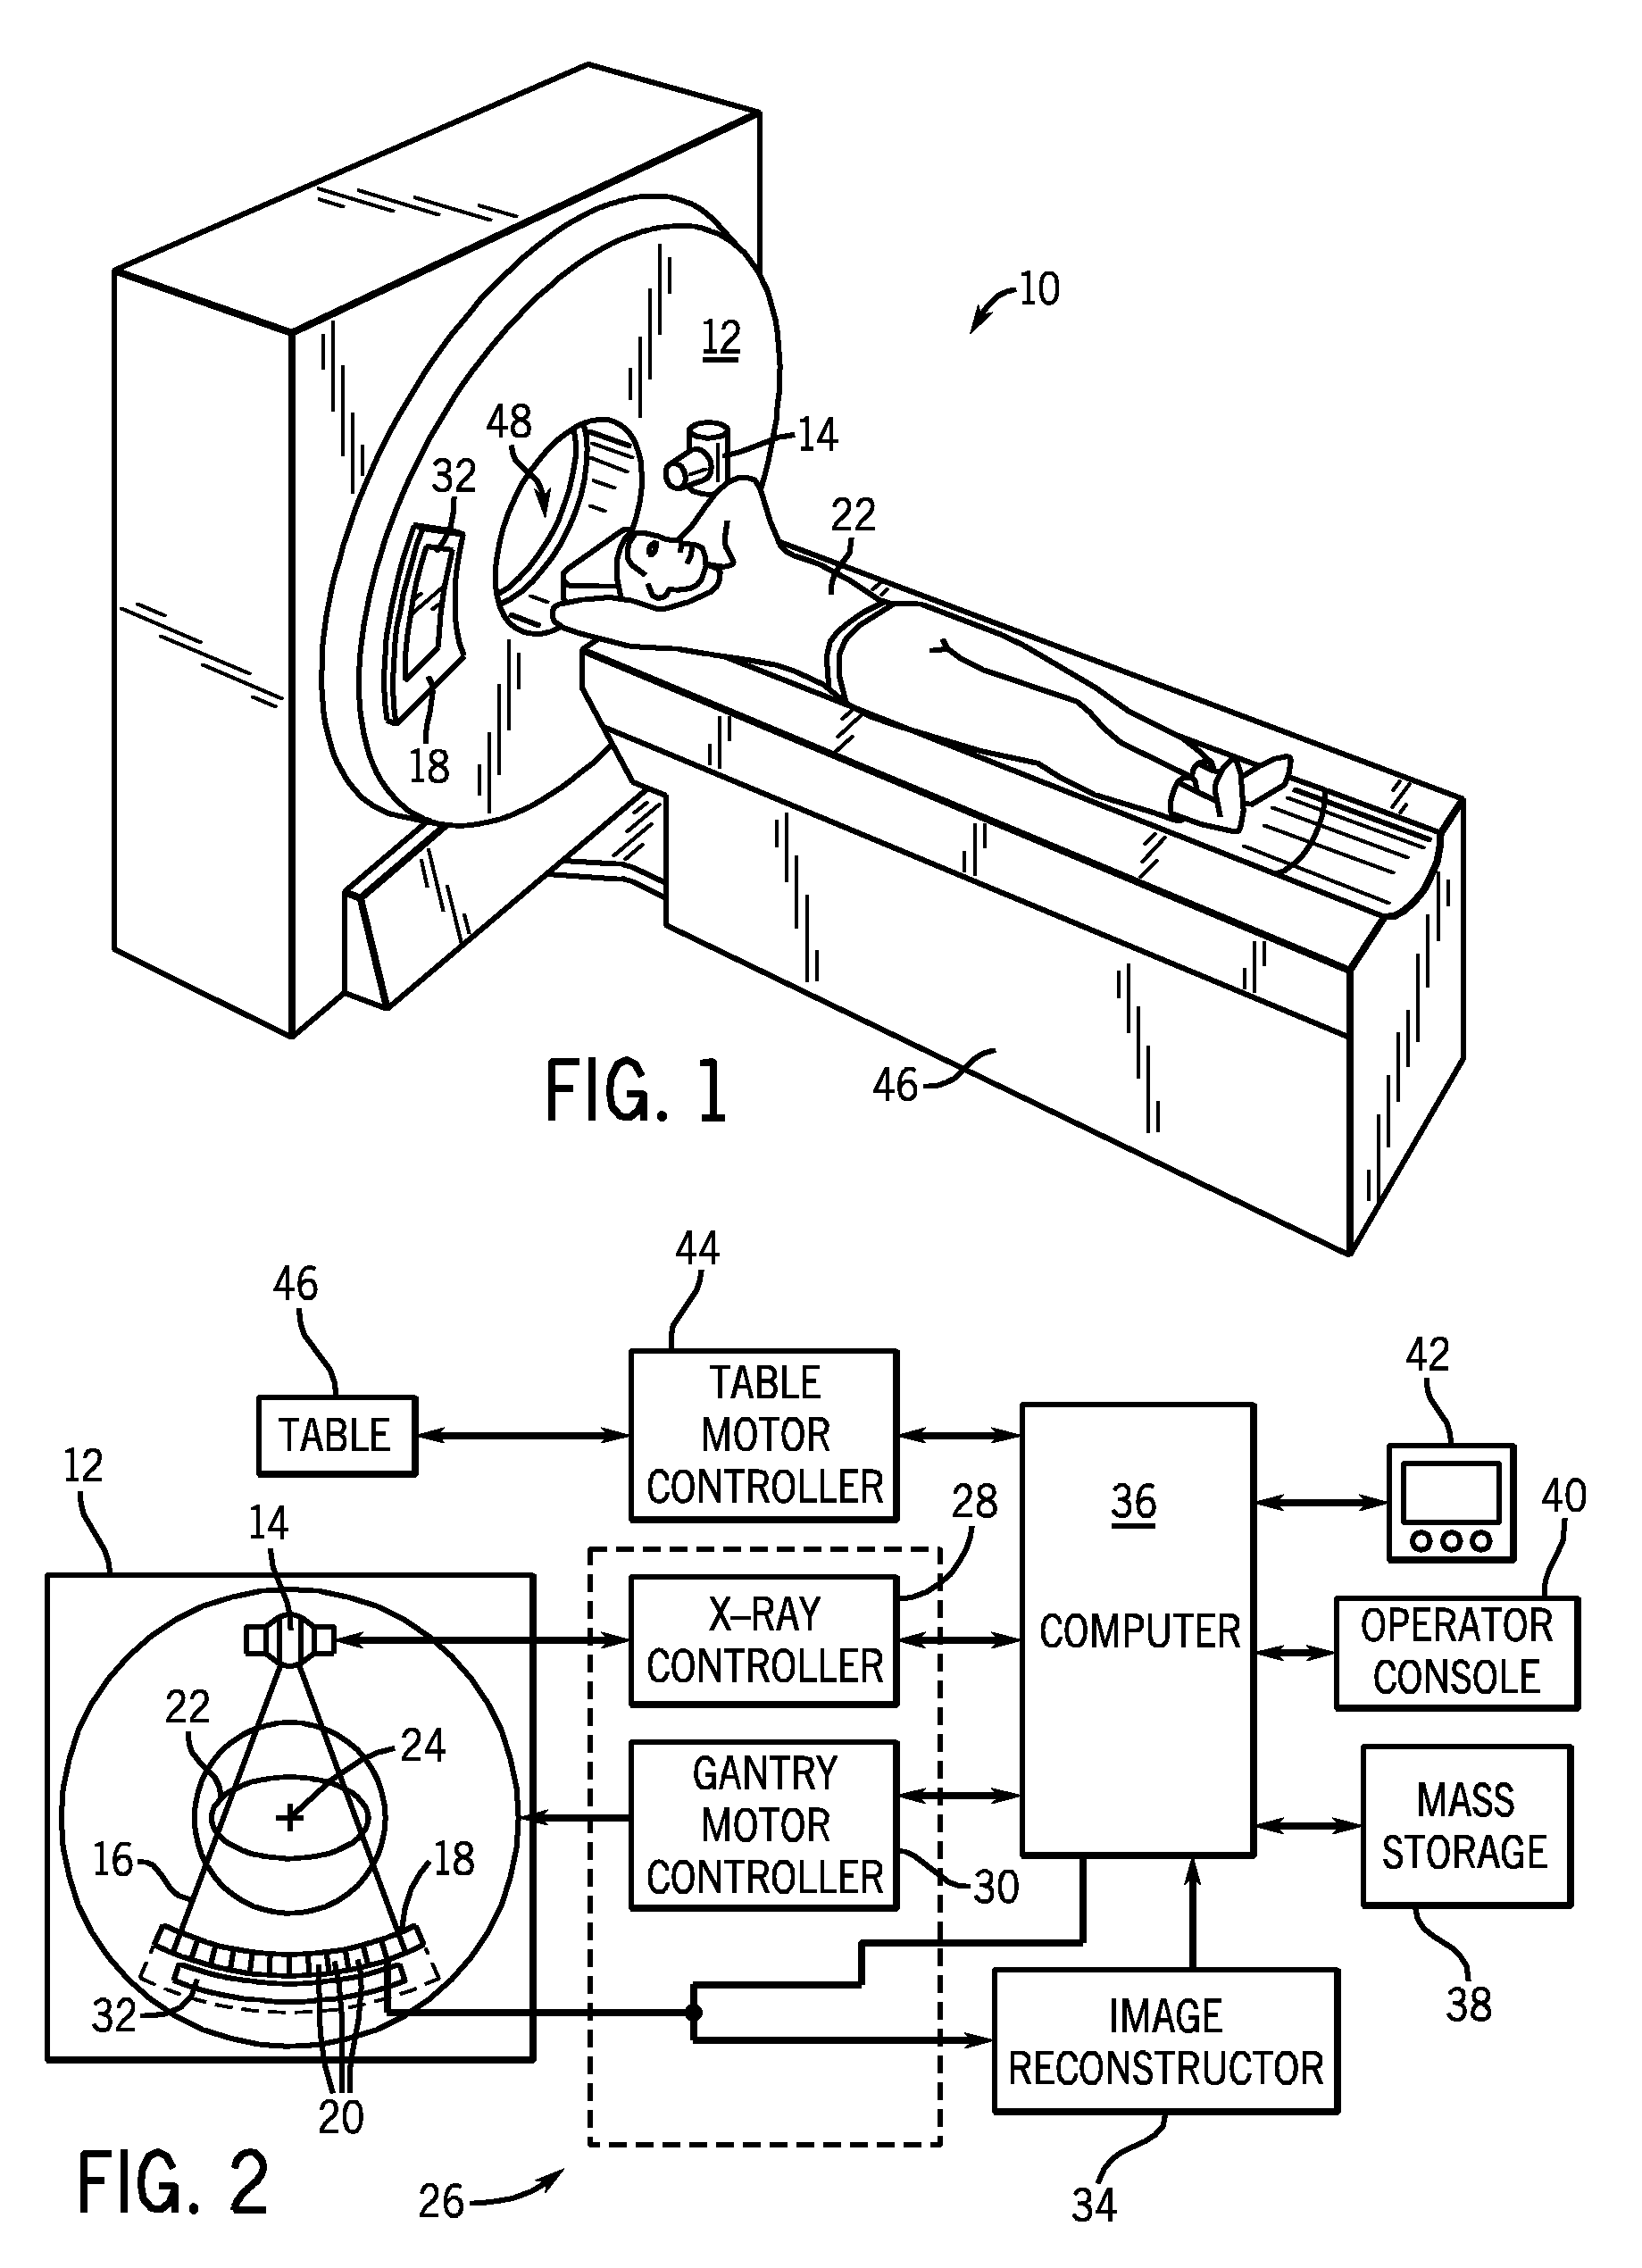 Method and apparatus to reduce charge sharing in pixellated energy discriminating detectors